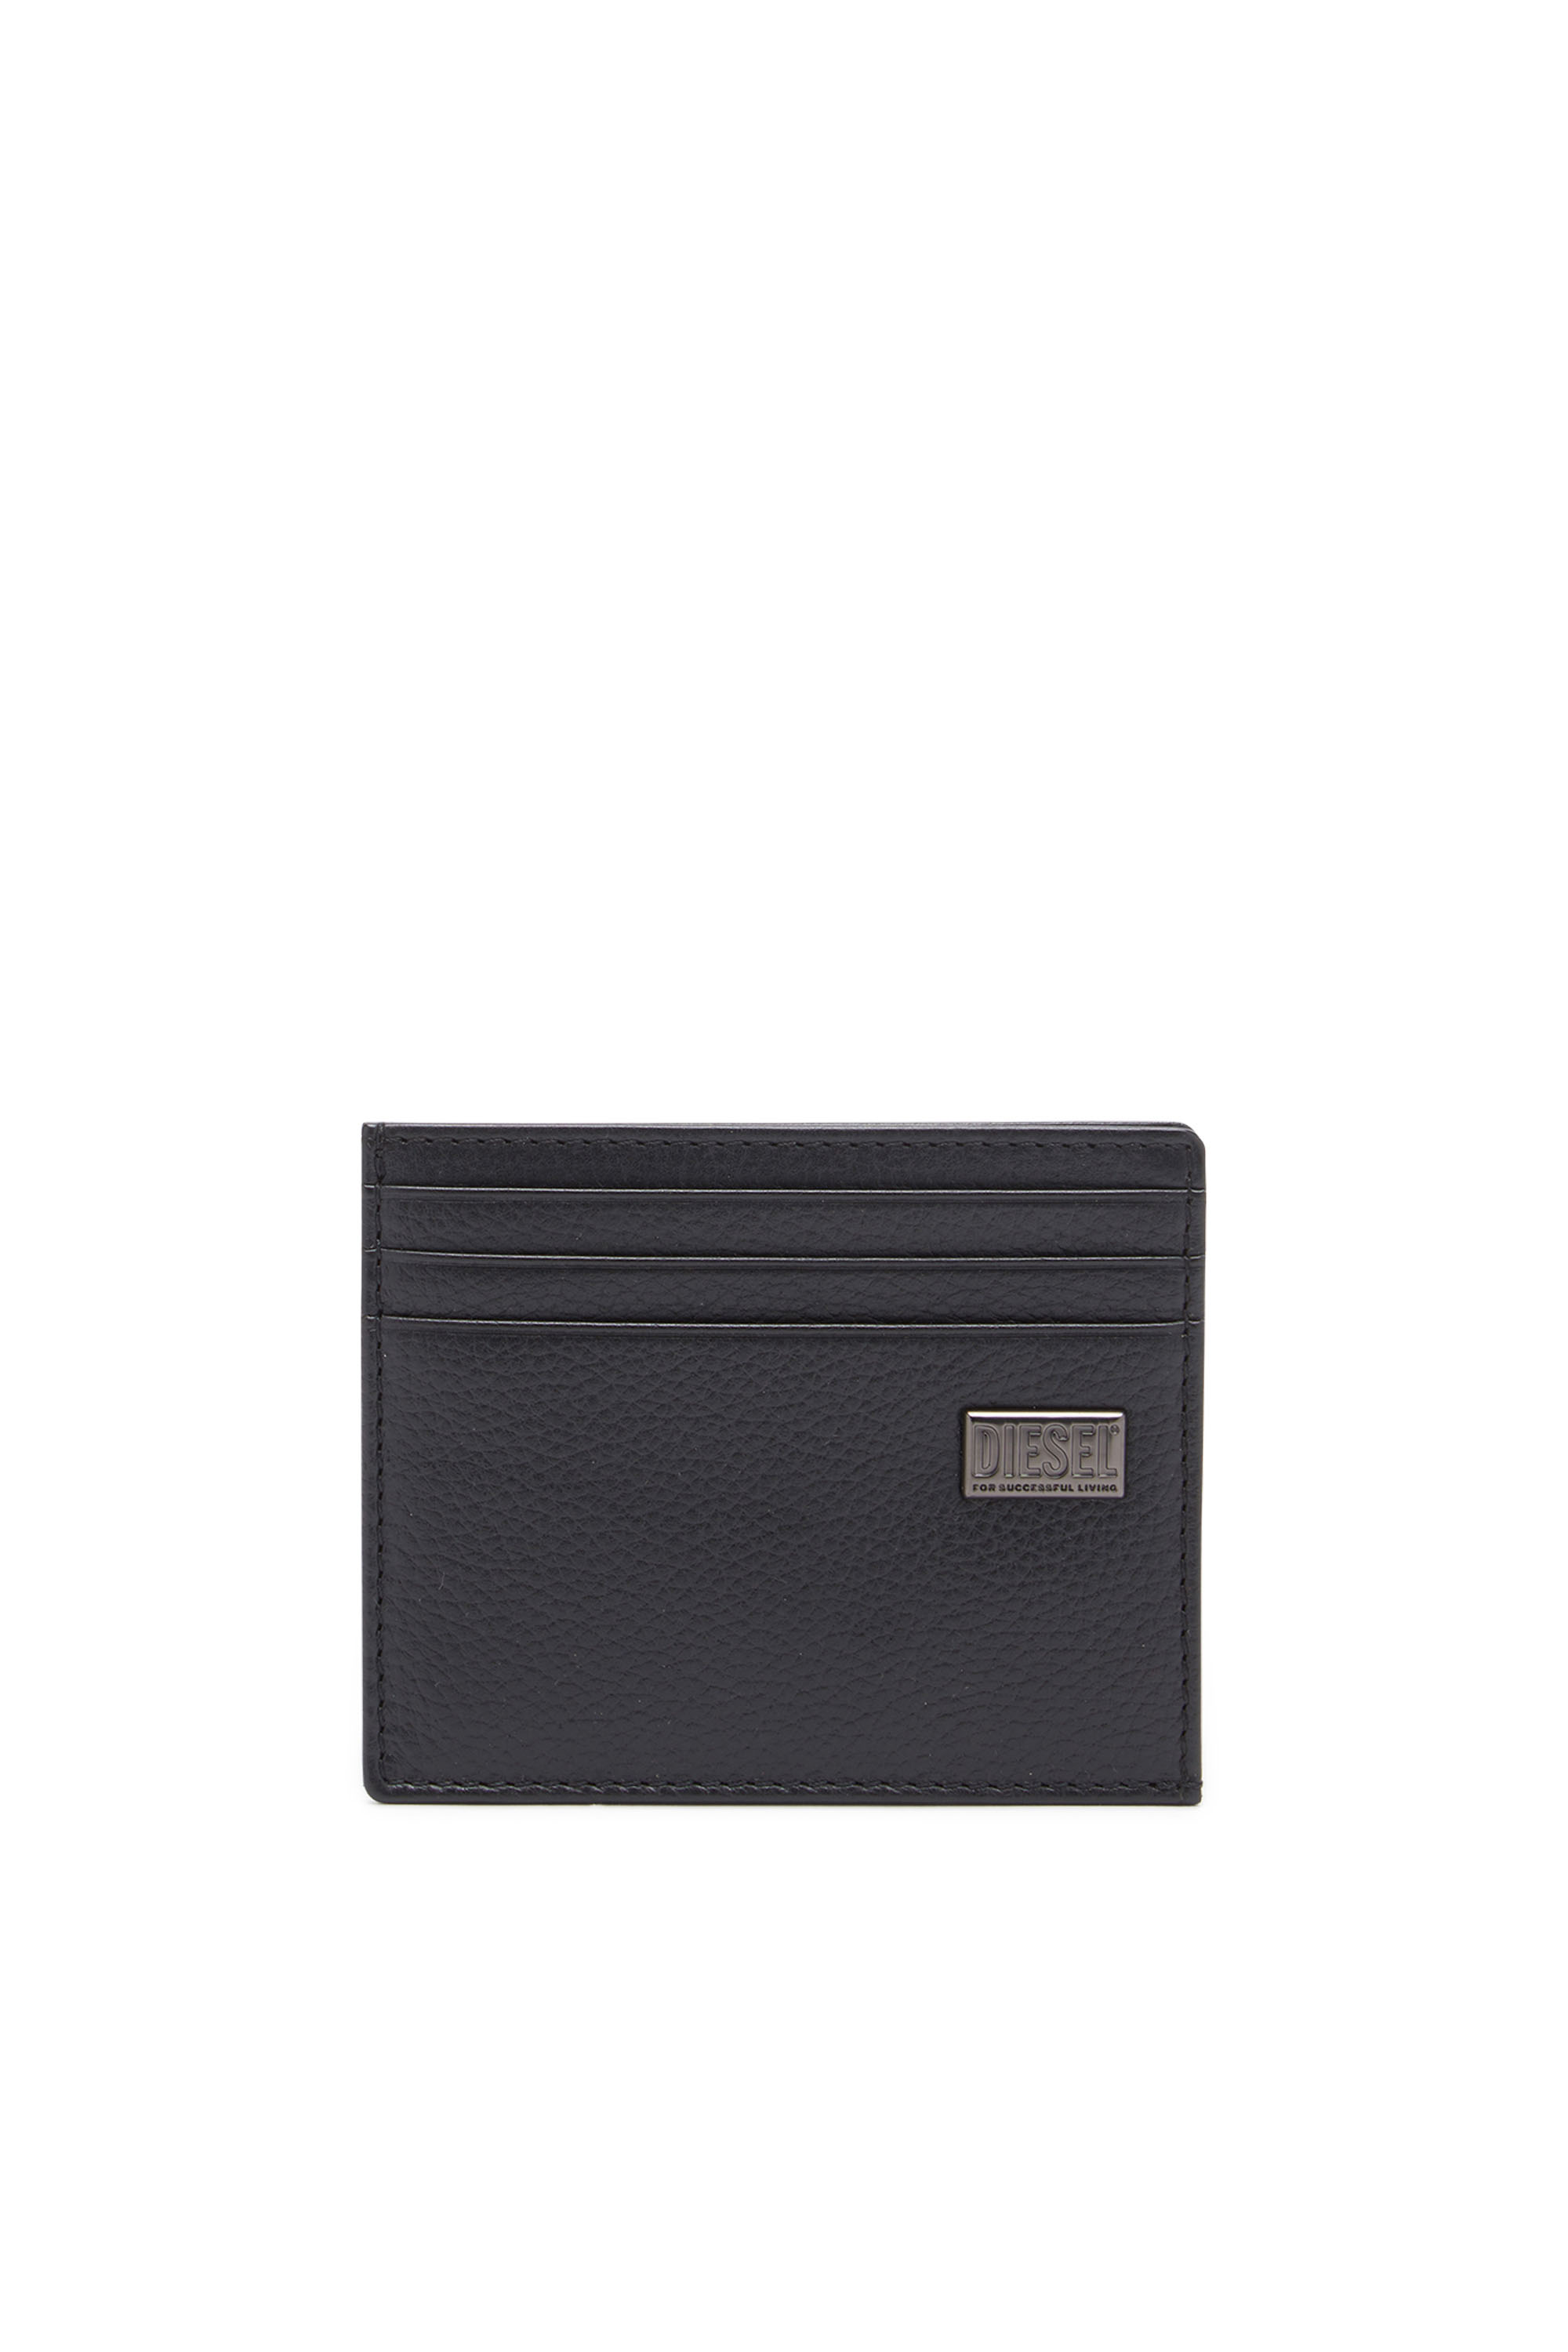 Card holder in grainy leather